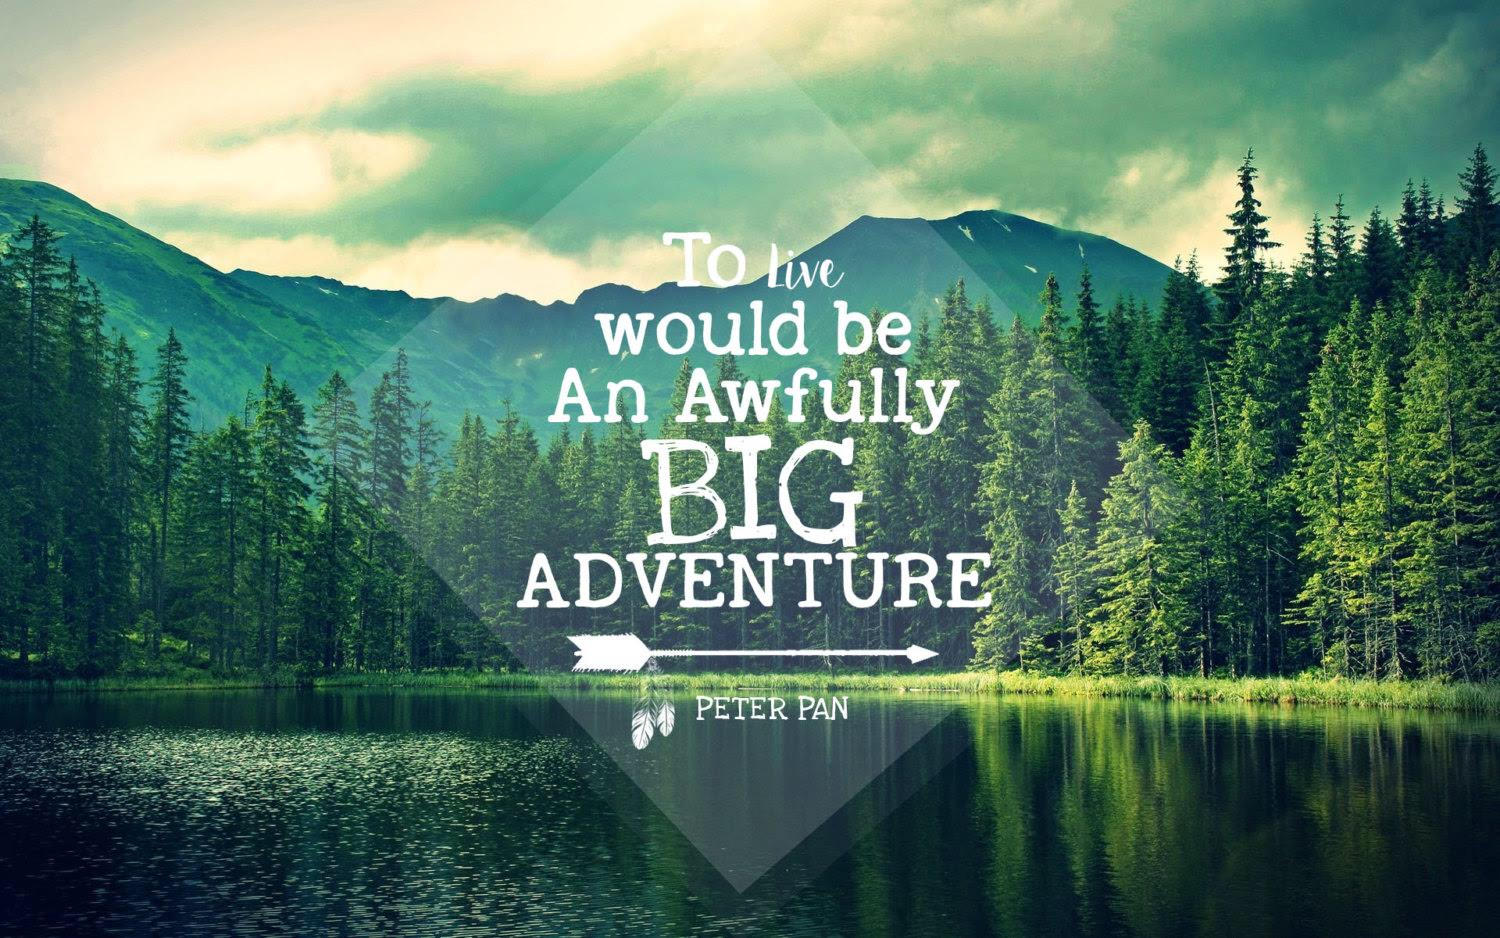 To live would be an awfully big adventure. -Peter Pan Image Credit: etsystatic.com. Desktop background quote, Phone wallpaper quotes, Peter pan